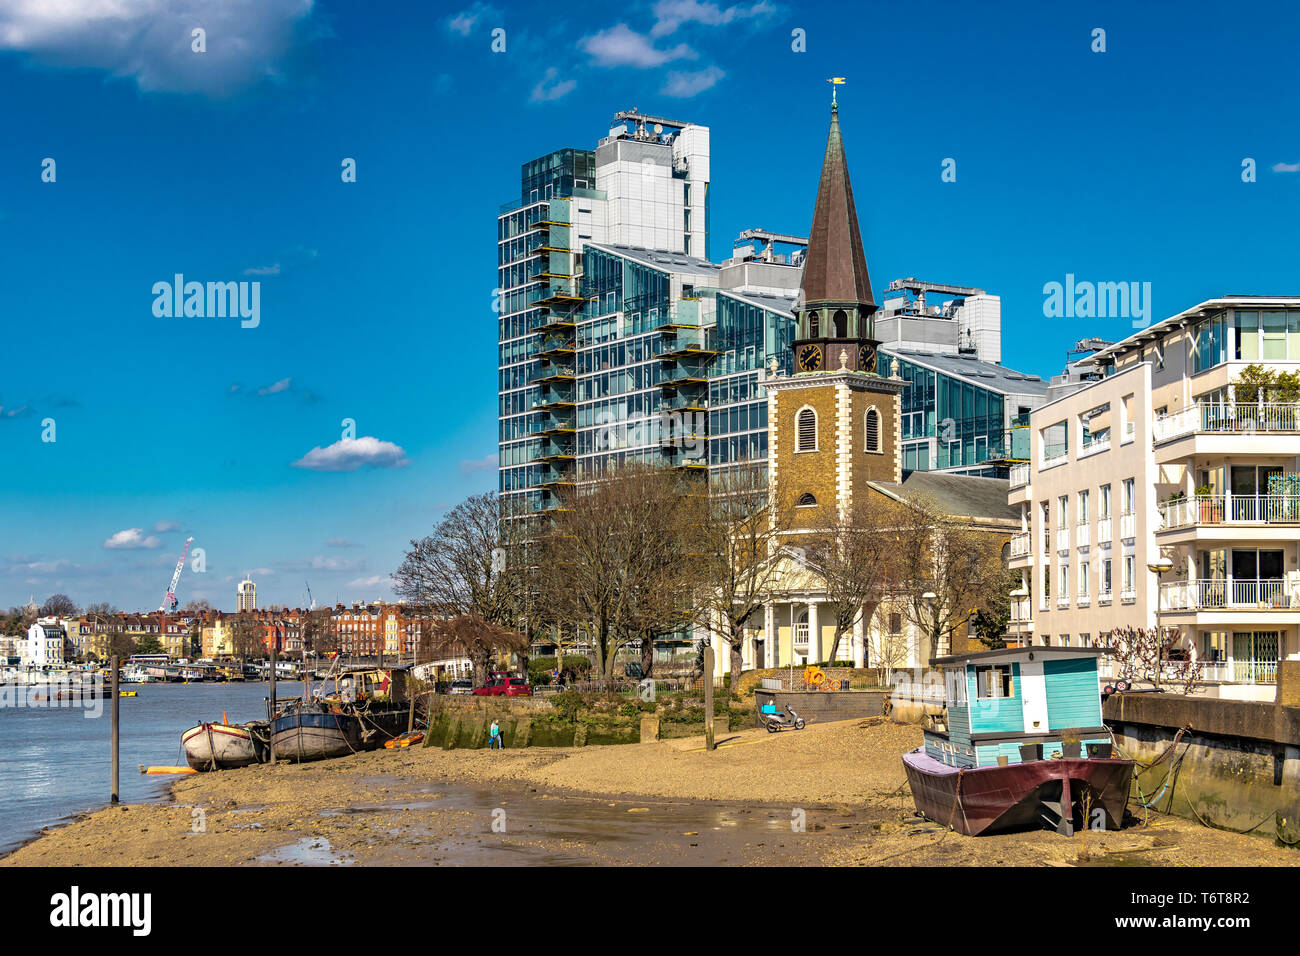 St Mary's Church, Battersea ,a Georgian Style church by the banks of the River Thames, London, UK Stock Photo